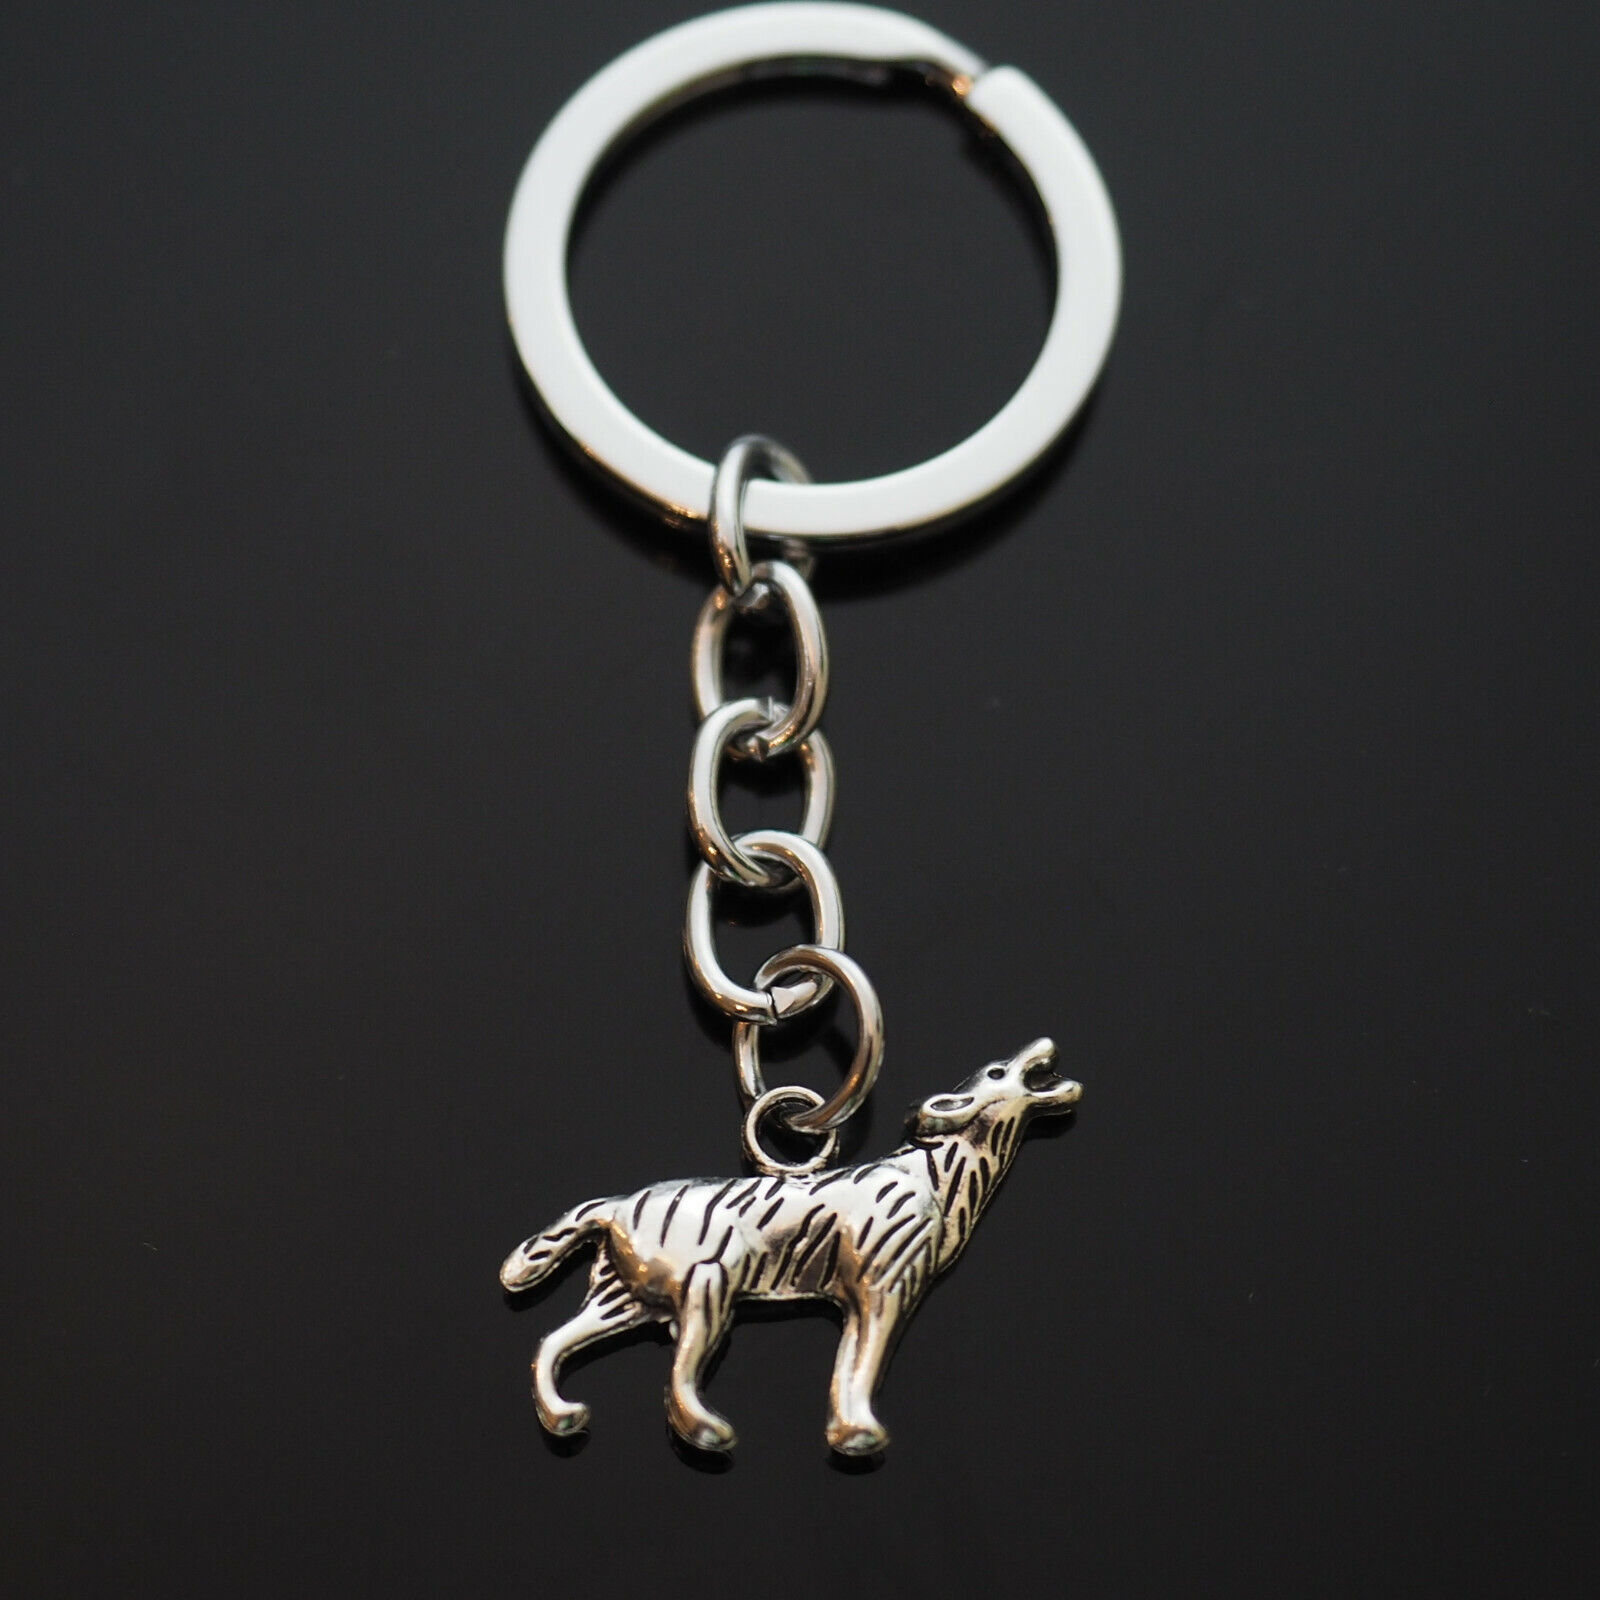 Howling Wolf 3D Silver Pendant Charm Keychain Gift Key Chain